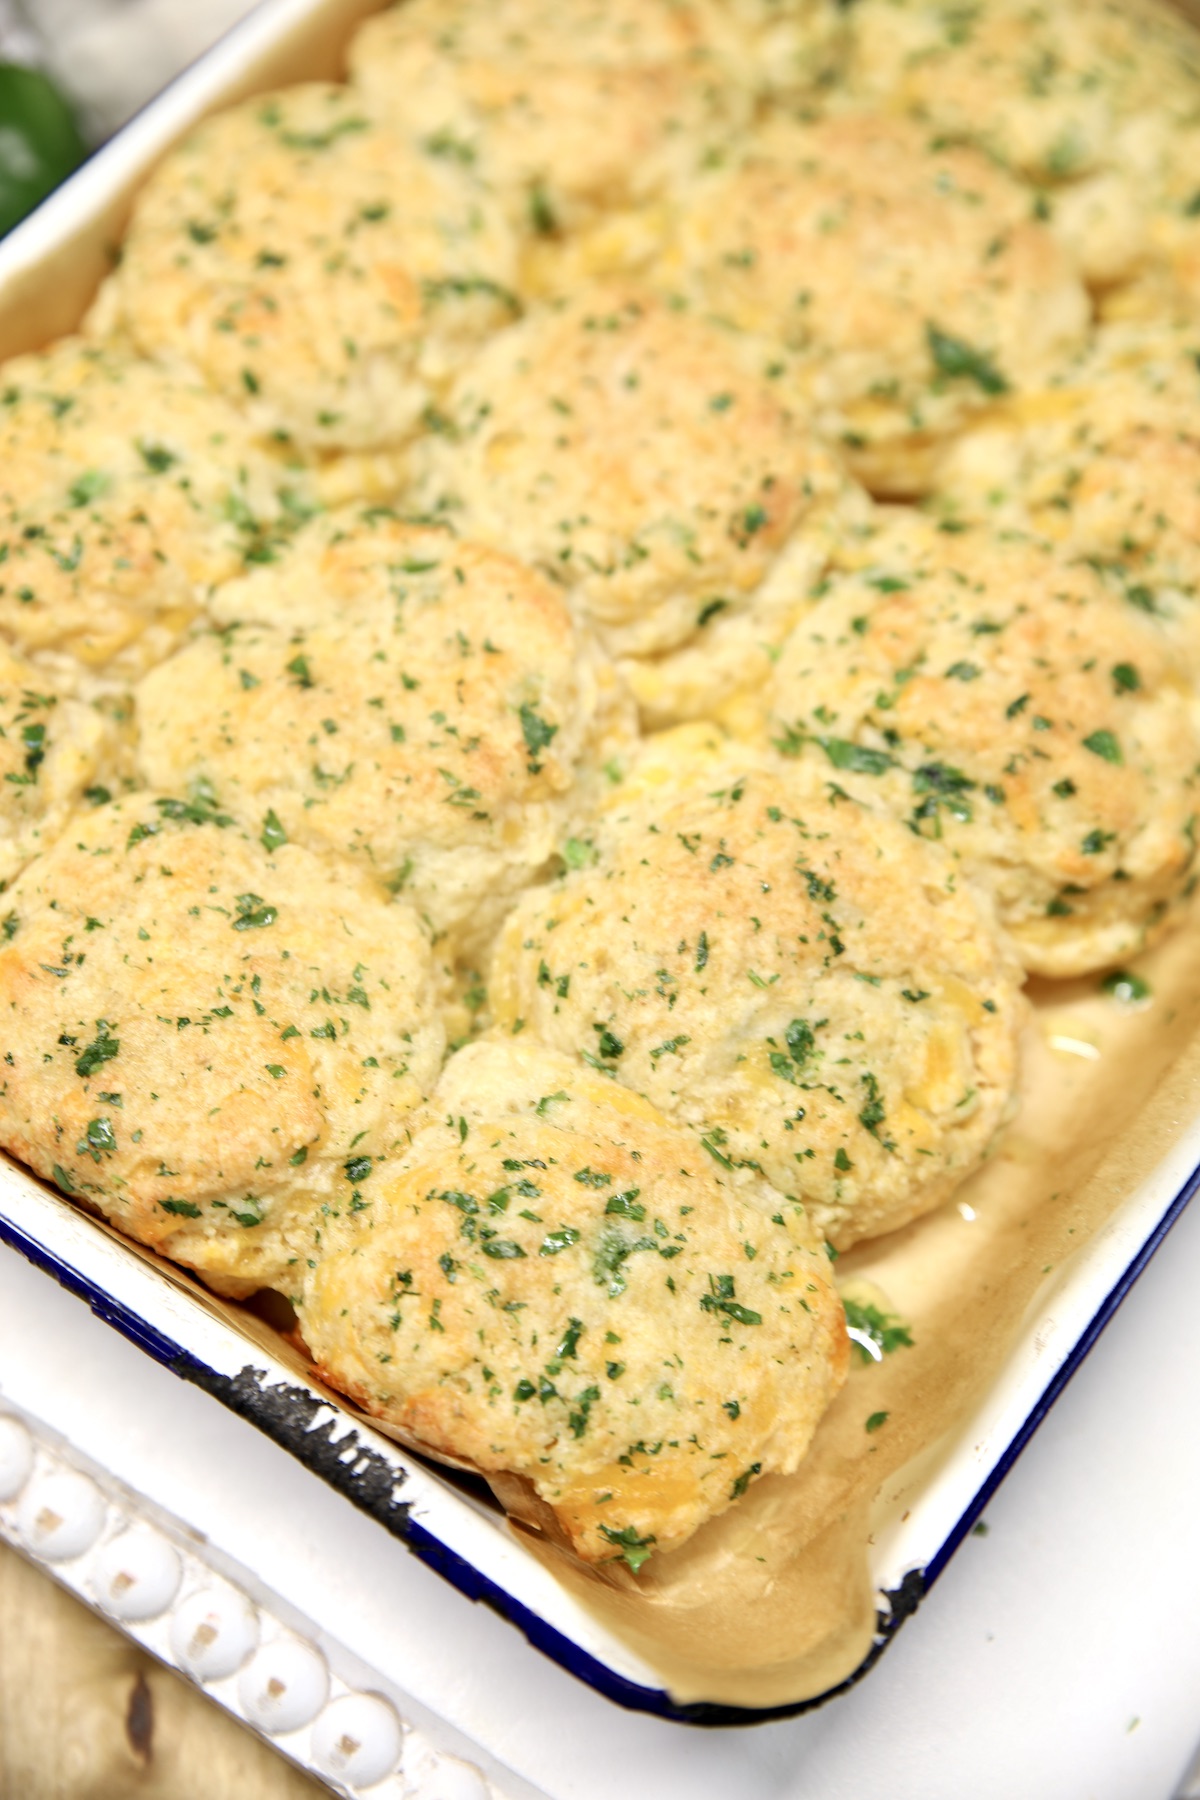 Pan of jalapeno cheddar biscuits.